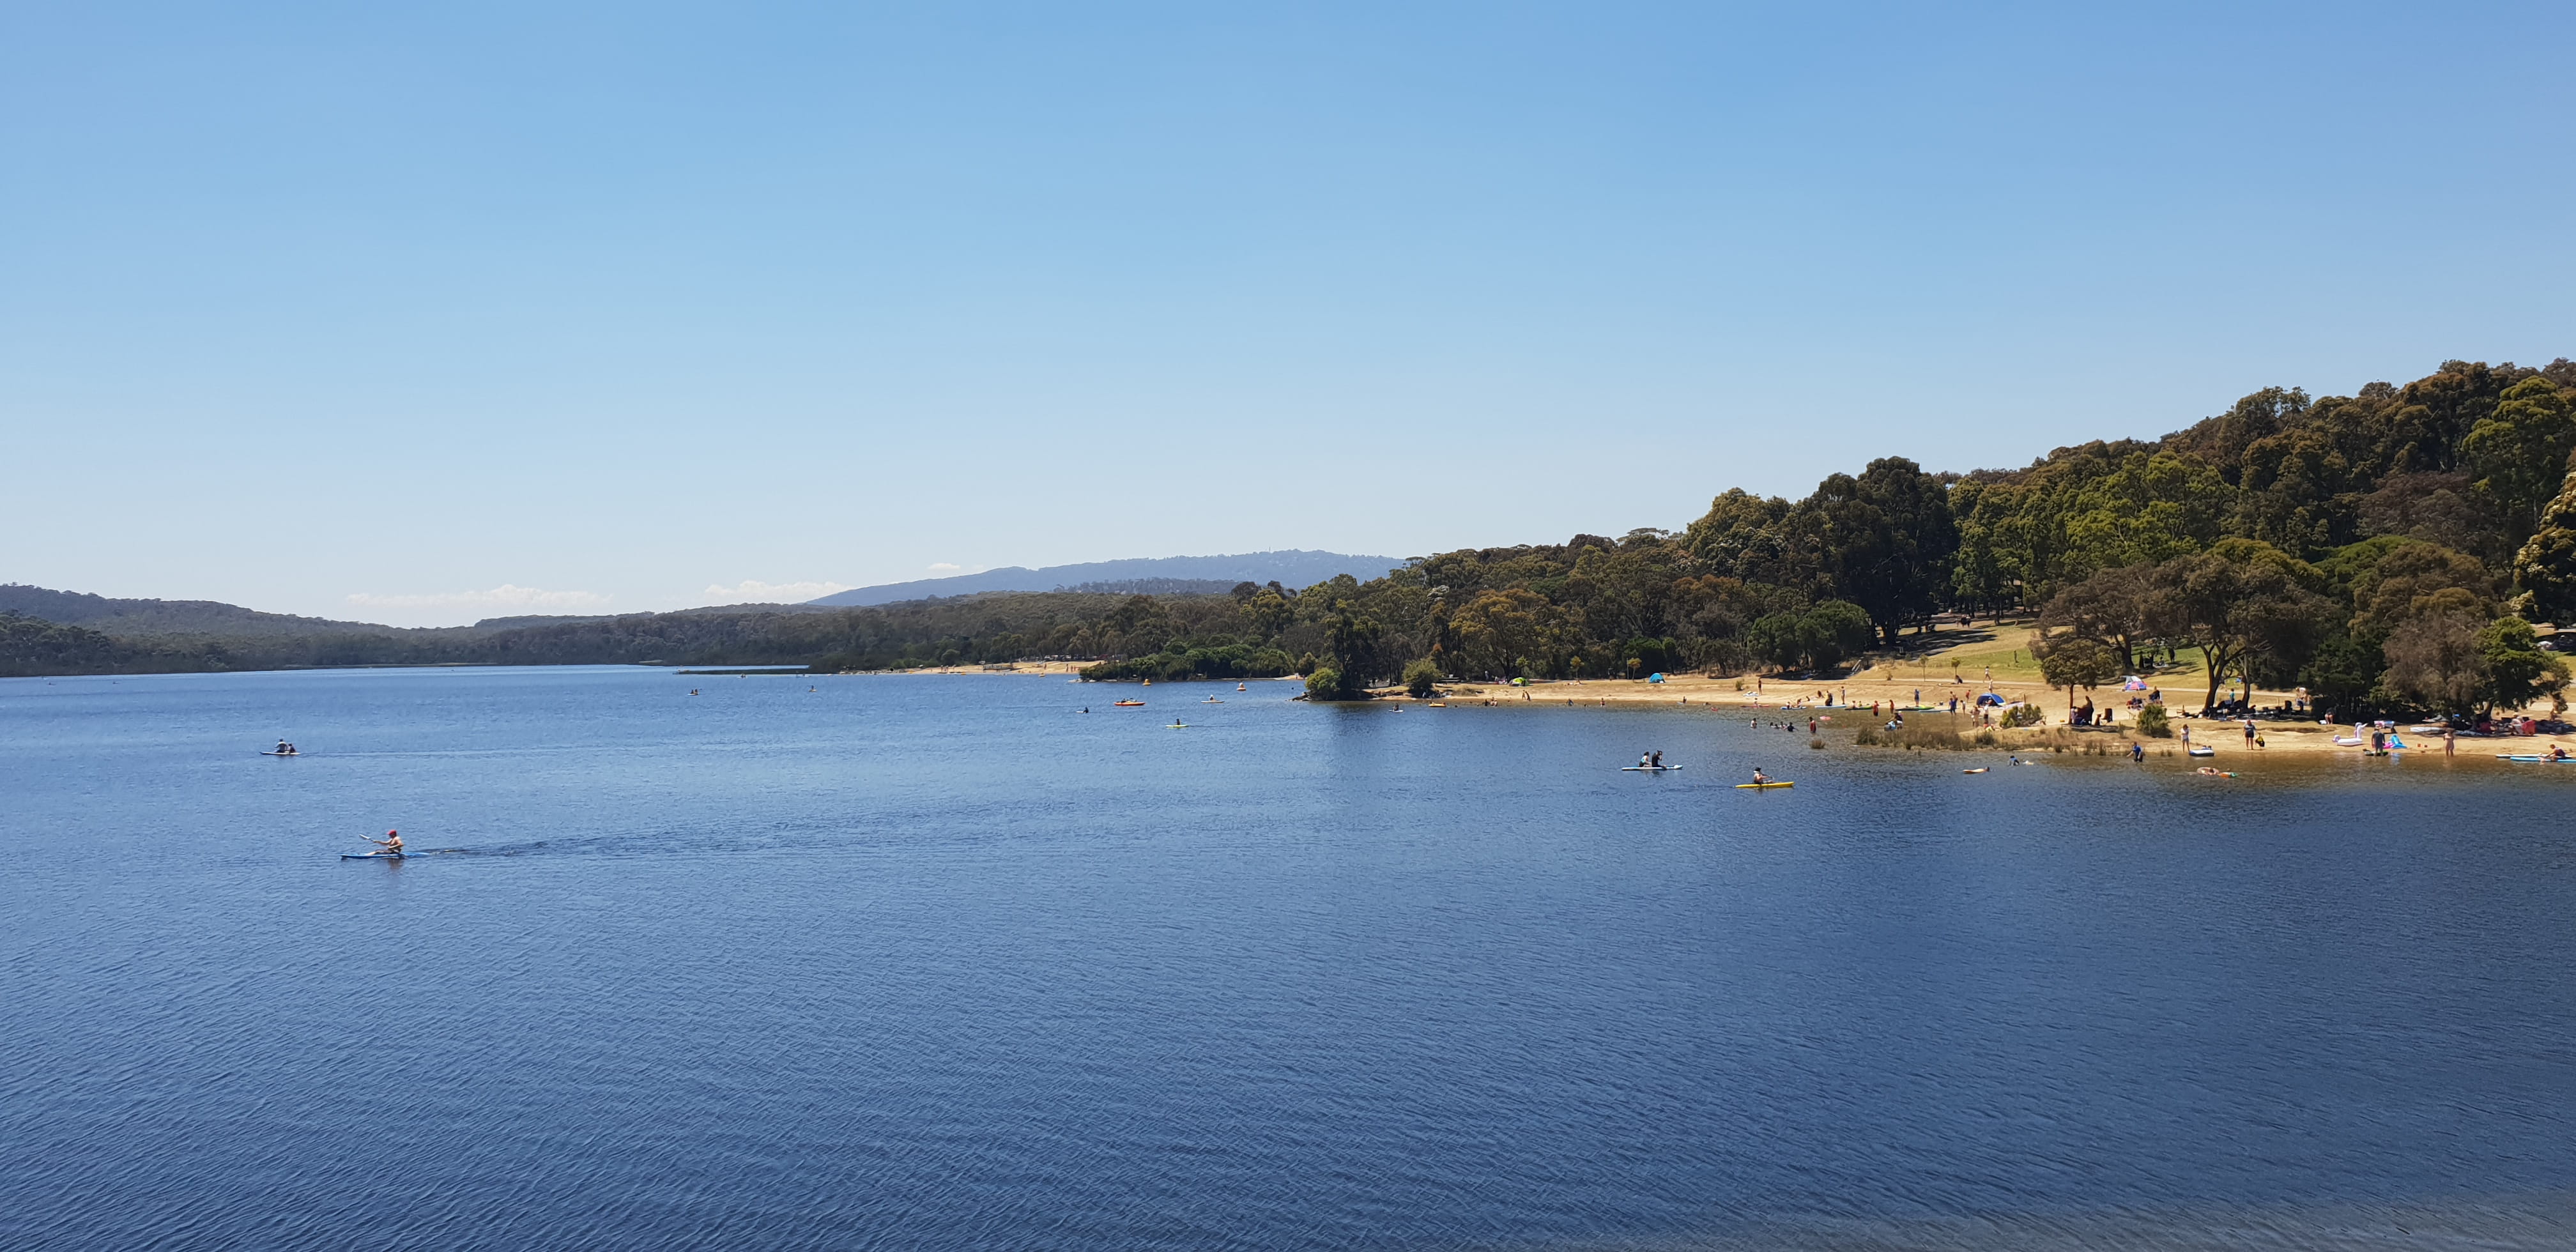 Picture of Lysterfield lake with families enjoying water activities and swimming at the beach